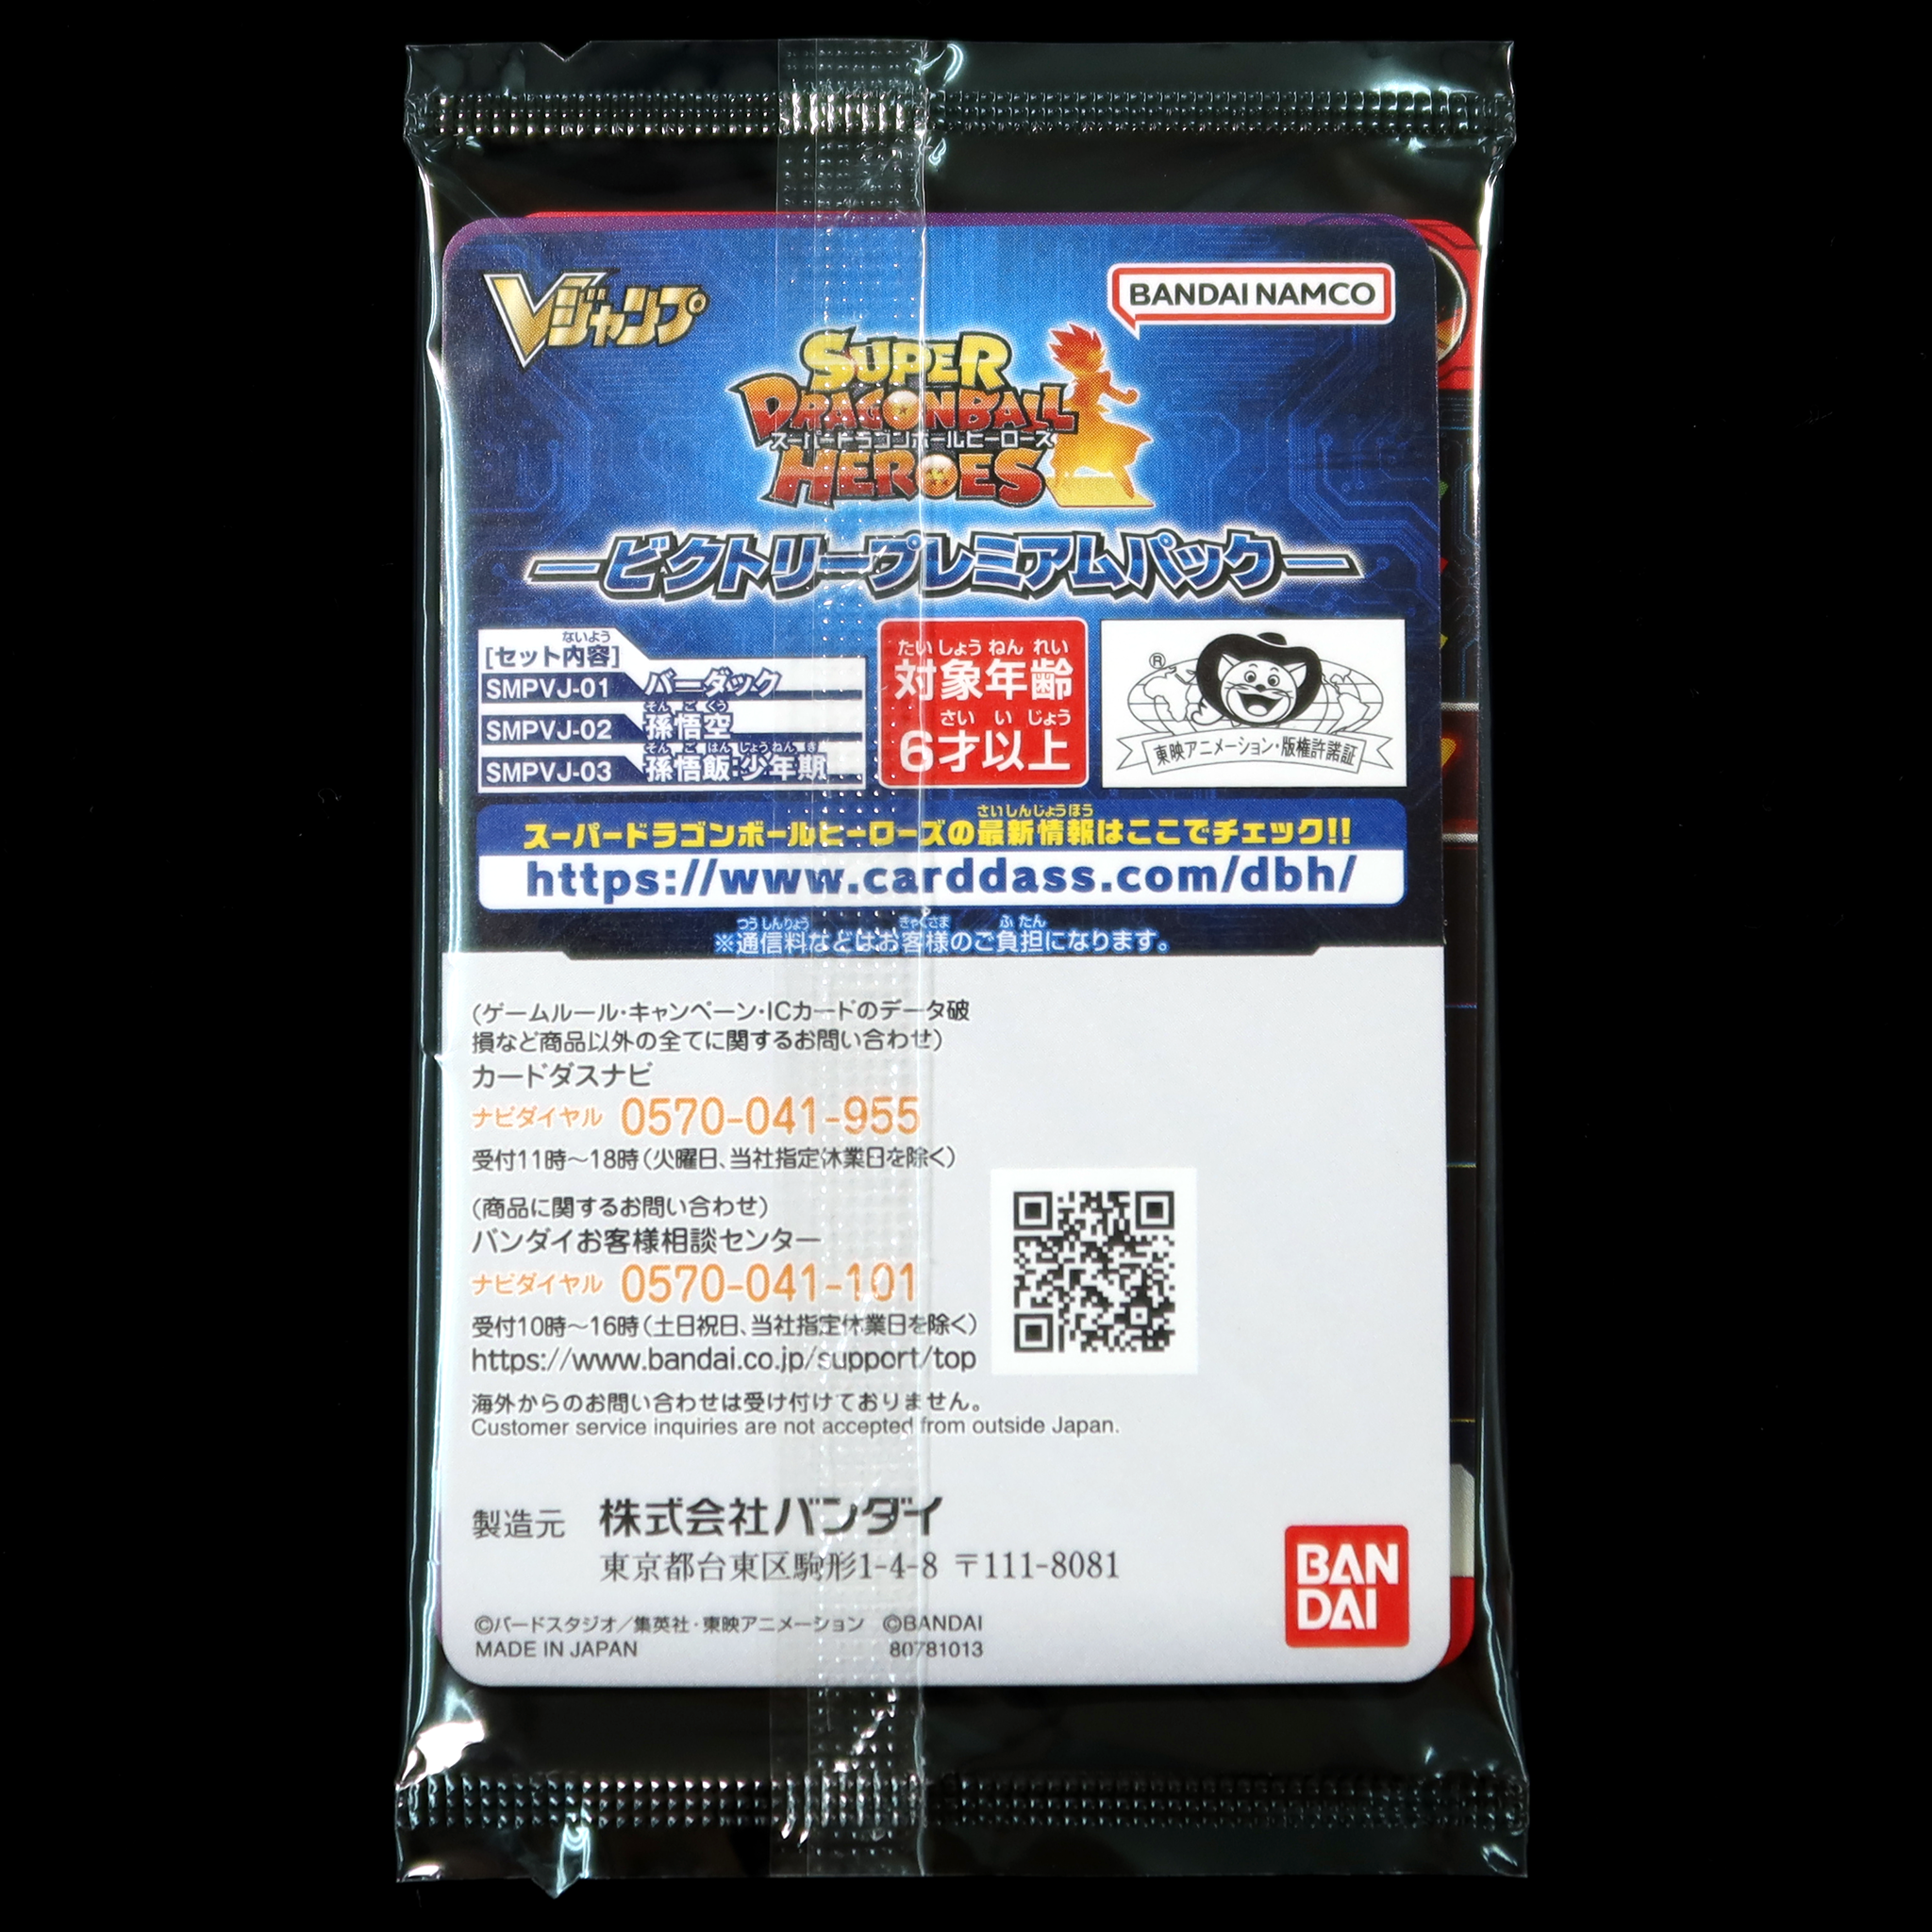 SUPER DRAGON BALL HEROES Victory Premium Pack SMPVJ-01 / 02 / 03 in blister